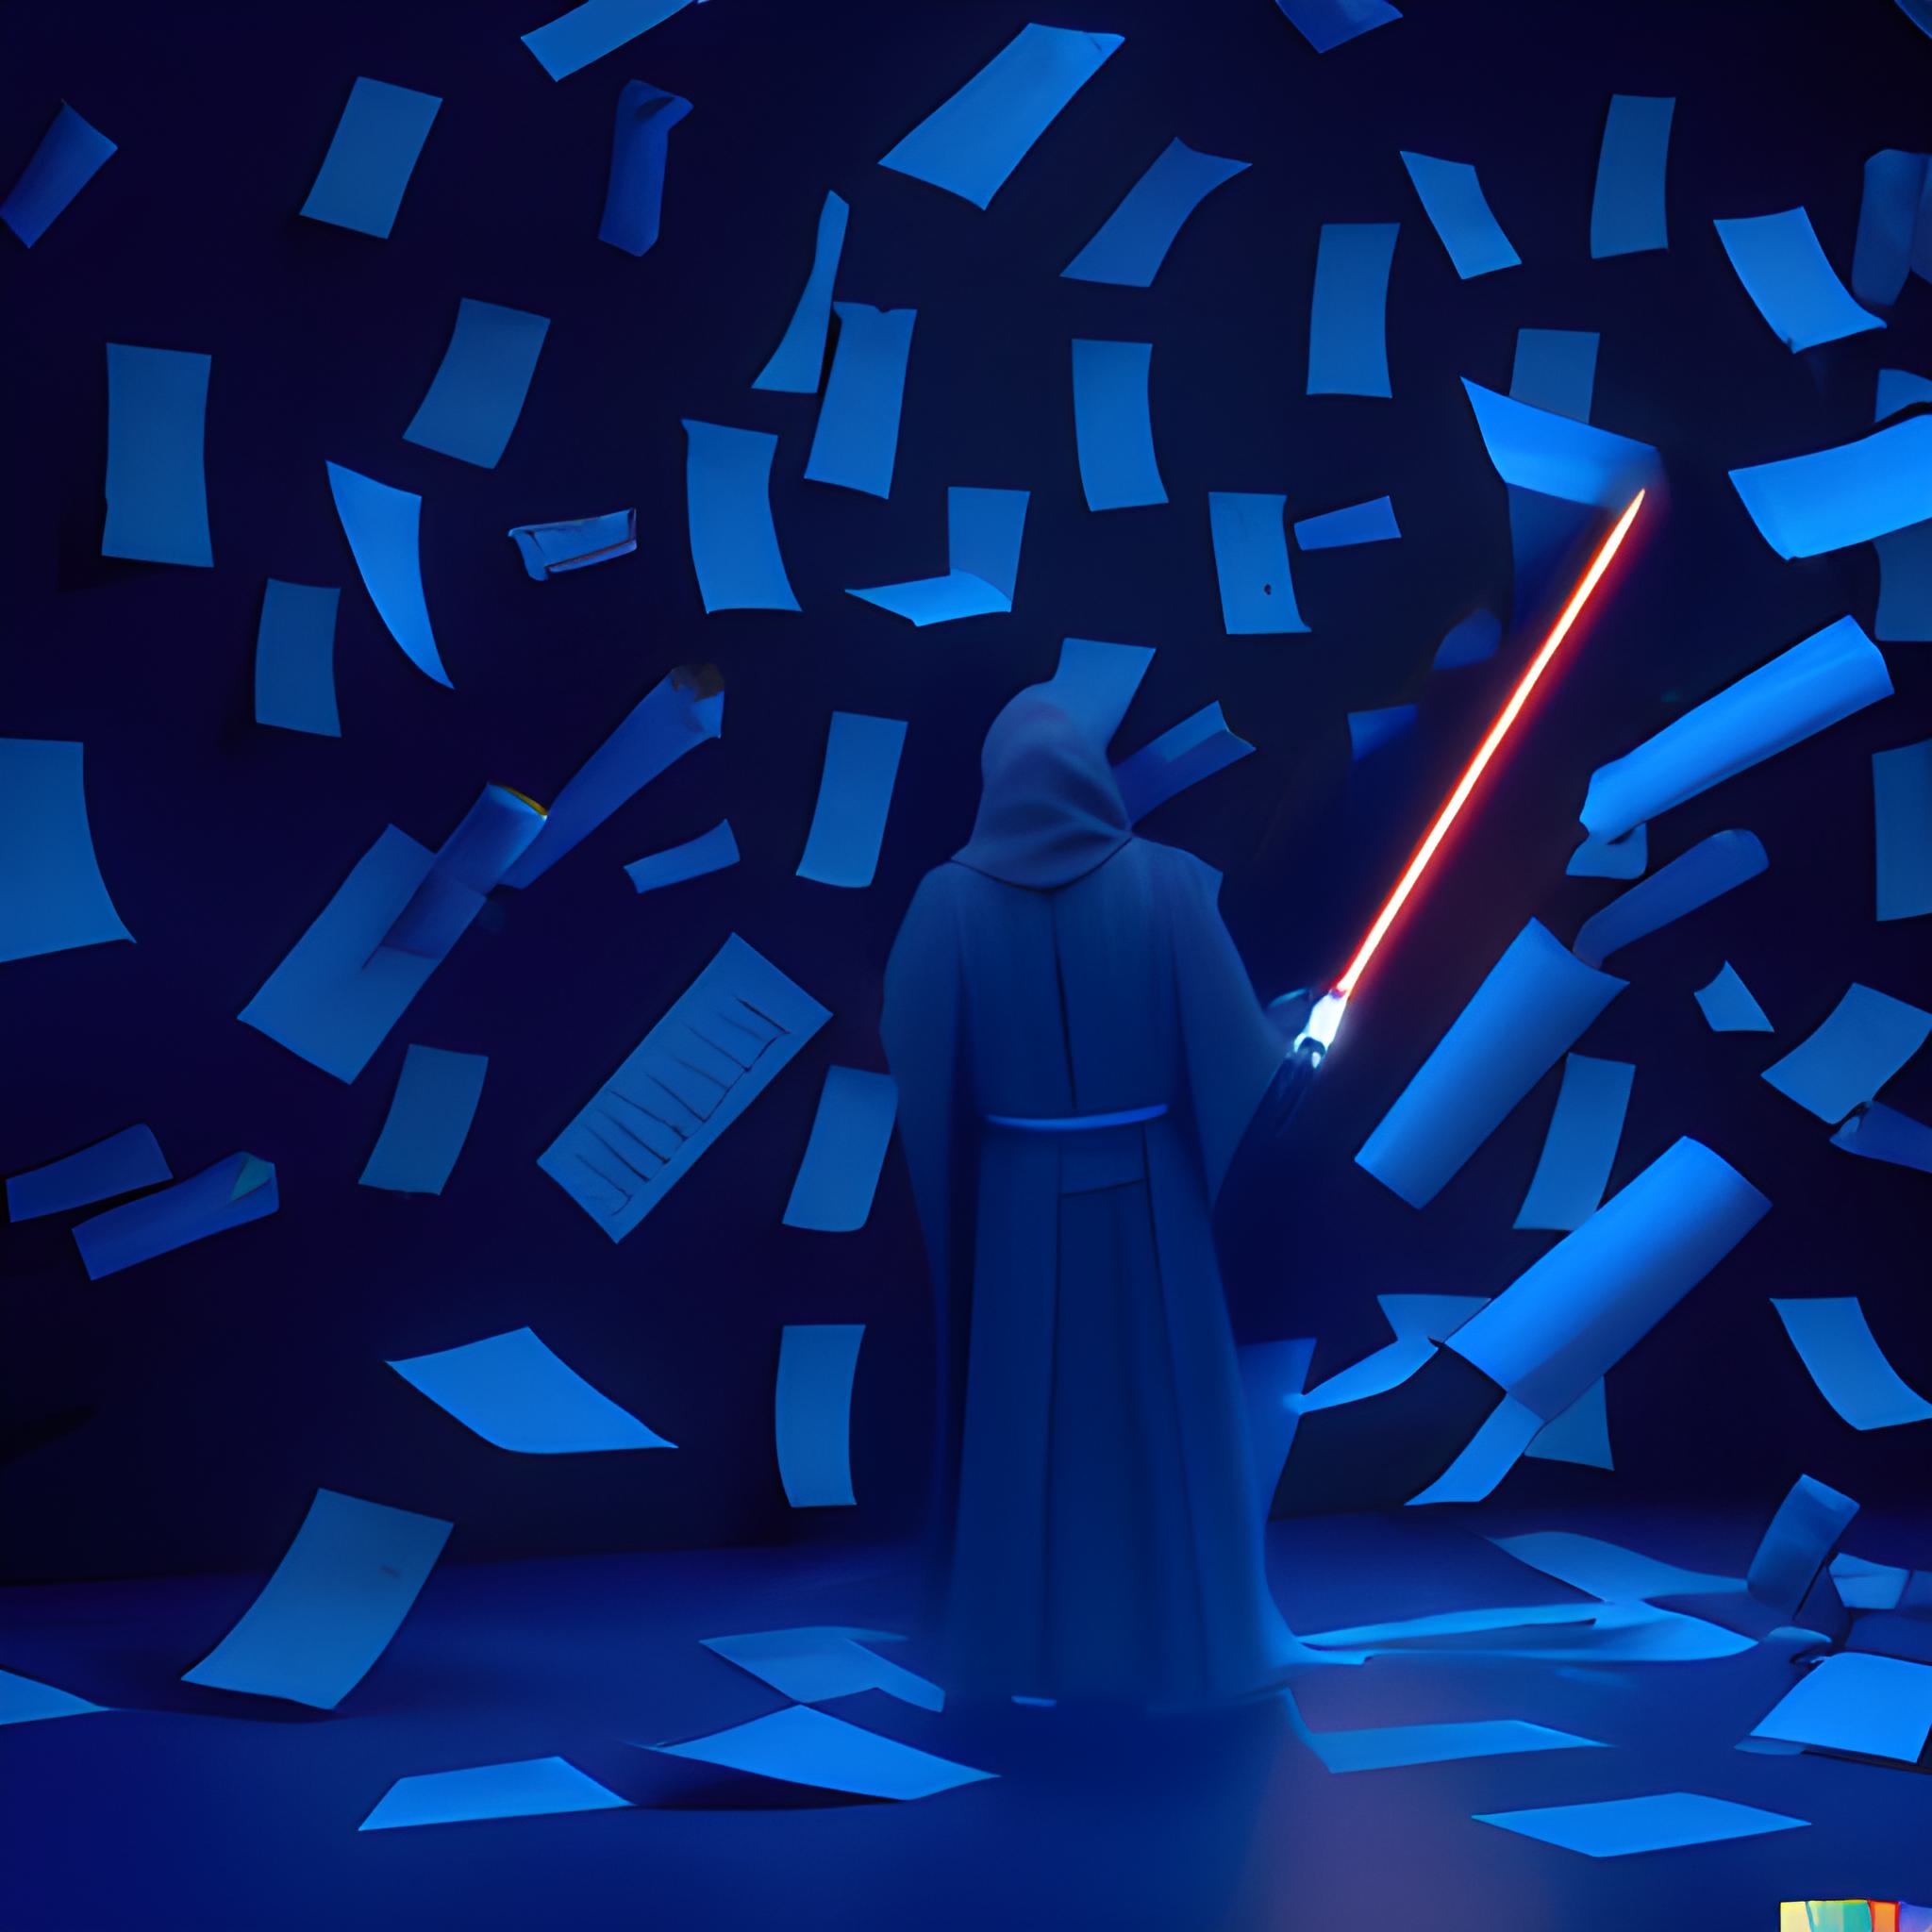 DALL·E + Stable Diffusion v1.4 - 19 pieces of paper falling in a blue room, with a large neon blue lightsaber cutting through paper, digital art